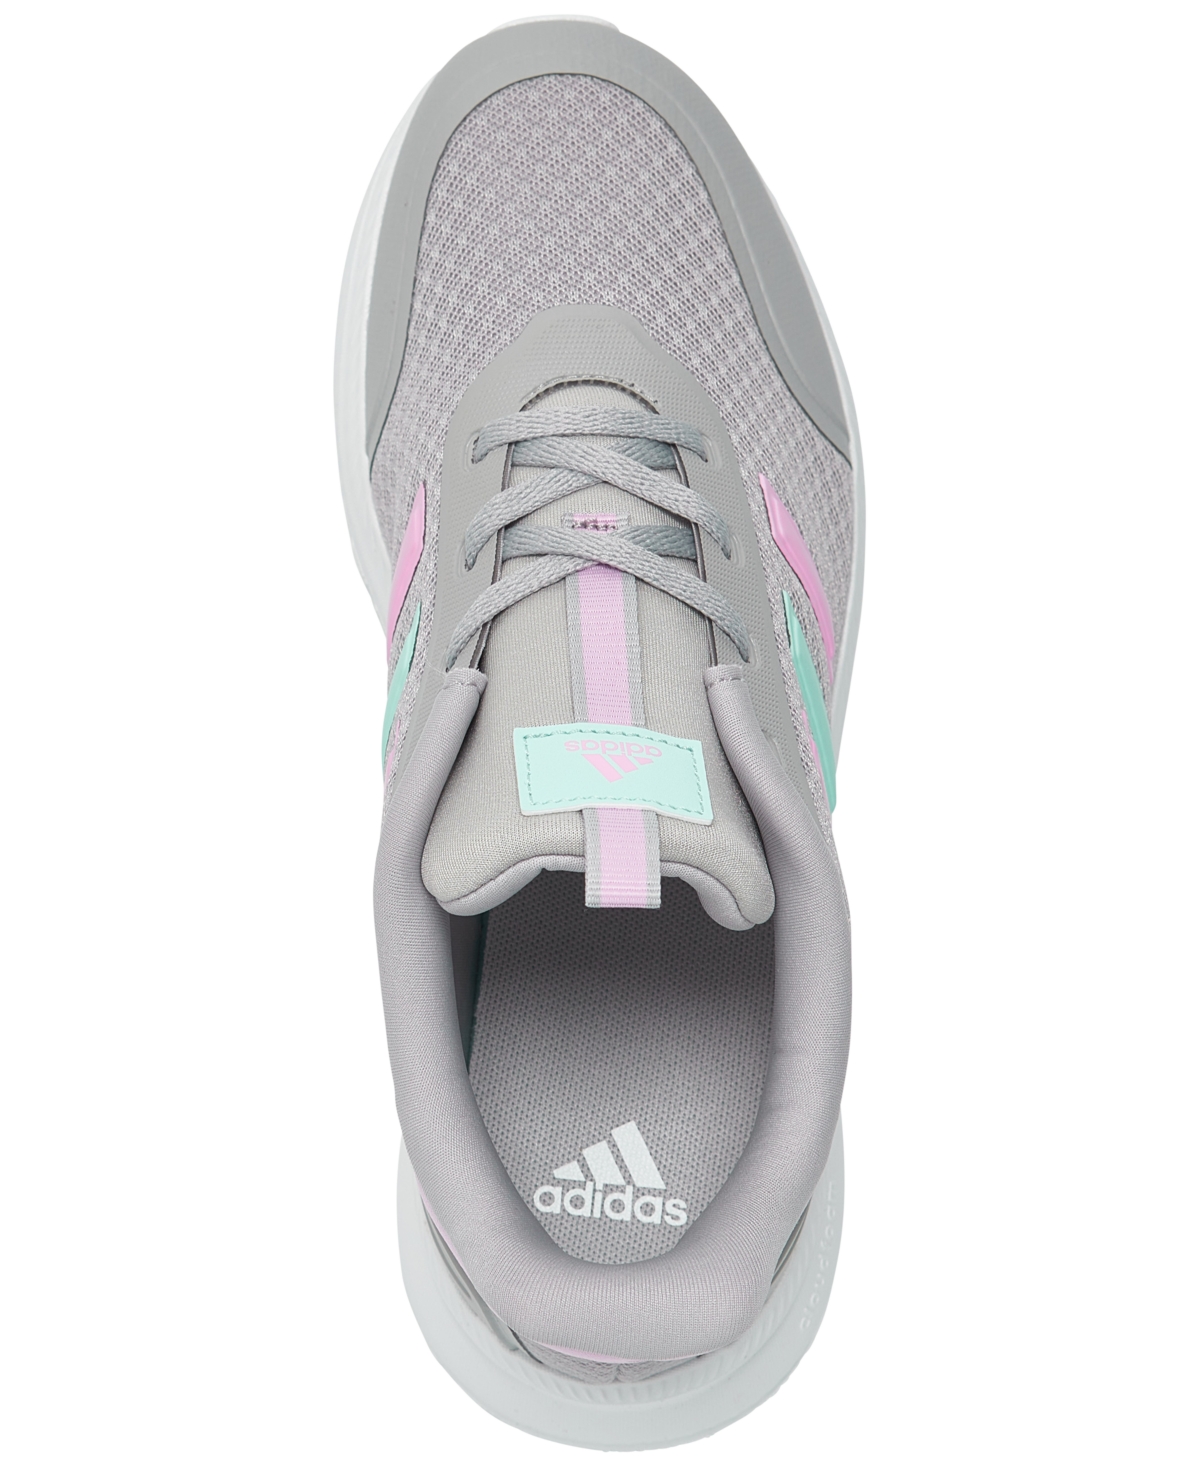 Shop Adidas Originals Big Girls Xplr Casual Sneakers From Finish Line In Gray Two,bliss Lilac,semi